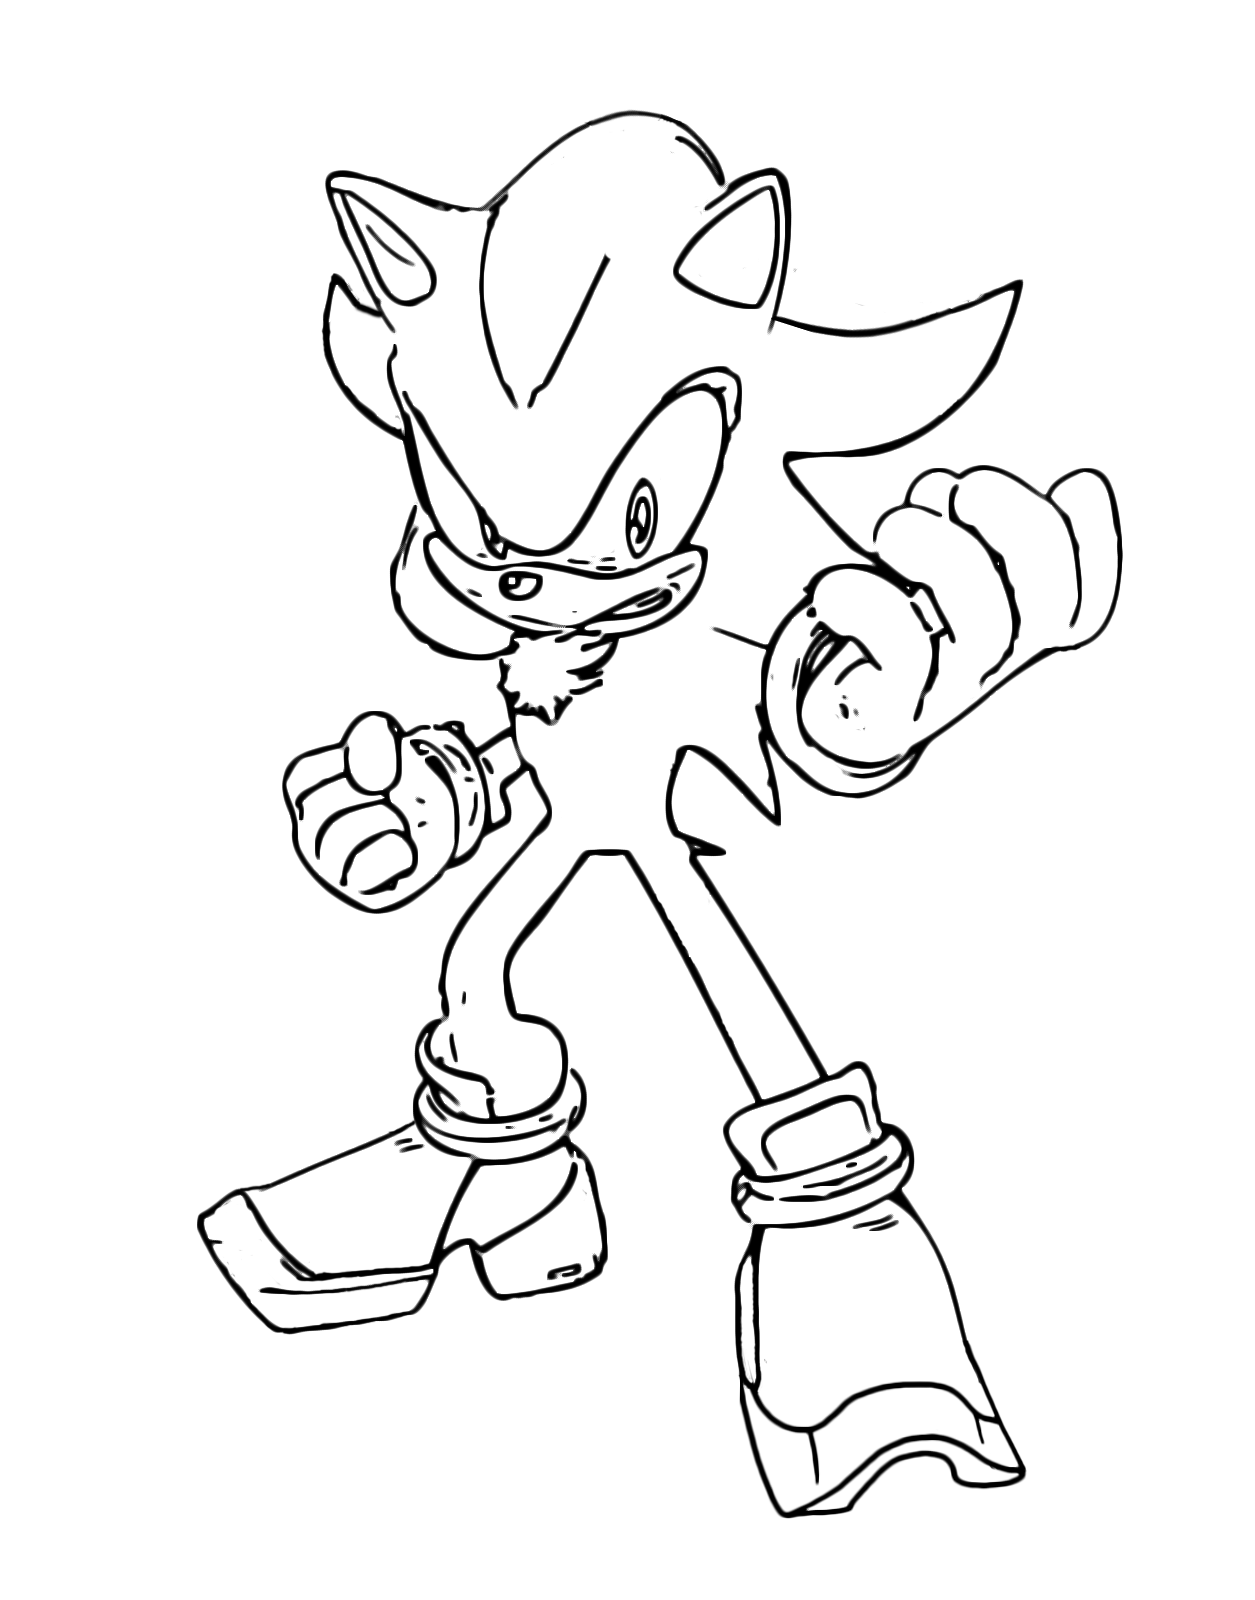 Sonic Boom - The evil Shadow ready to attack